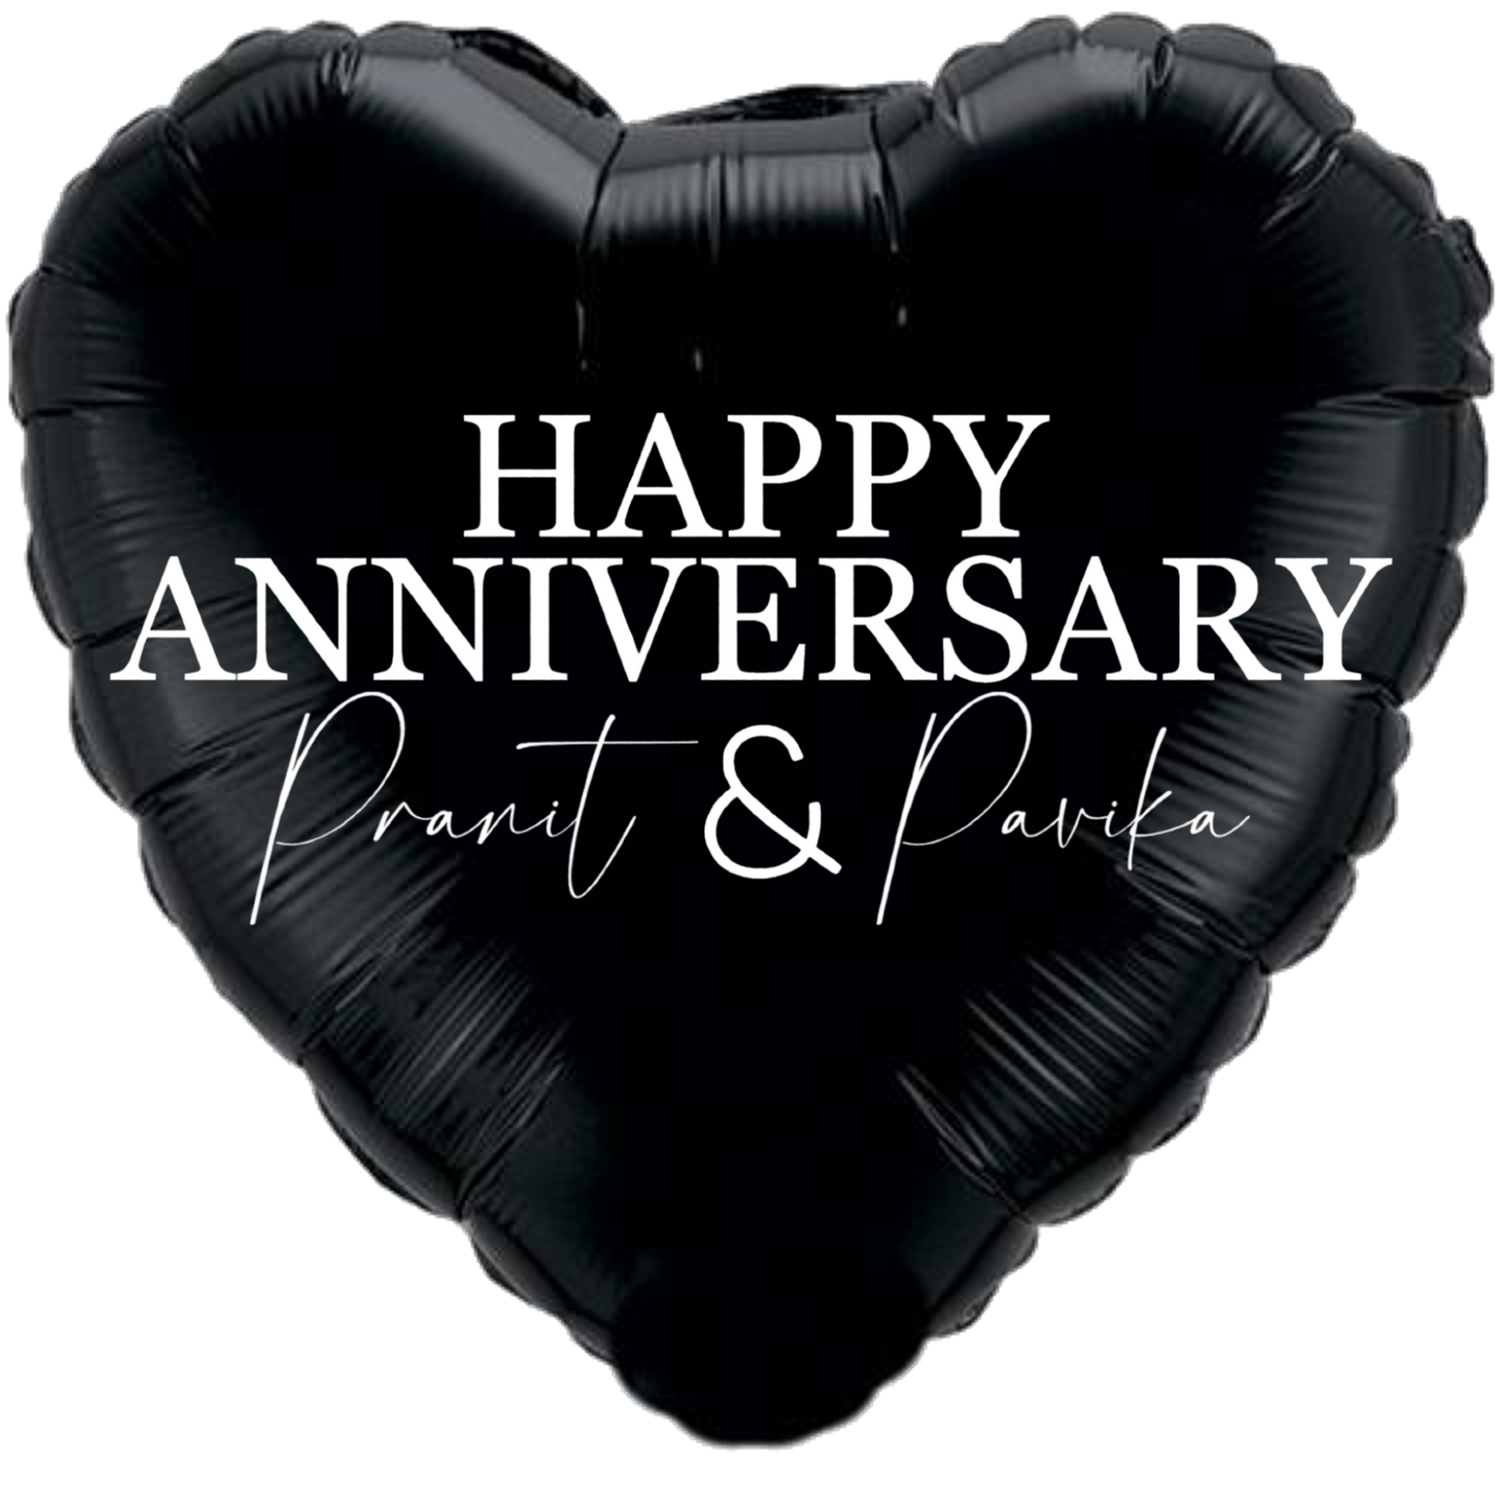 Custom Name/Text/Message Black Heart Balloons For First Wedding Anniversary, 2nd/3rd/5th/10th/15th/20th/25th/30th/35th/40th/45th/50th/55th/60th/65th/75th Marriage Anniversary And Wedding Milestones. Supports Helium/Air, Luxury Bespoke Balloons Make Perfect Decoration Supplies & Surprise For Your Husband/Wife/Partner/Other-Half.